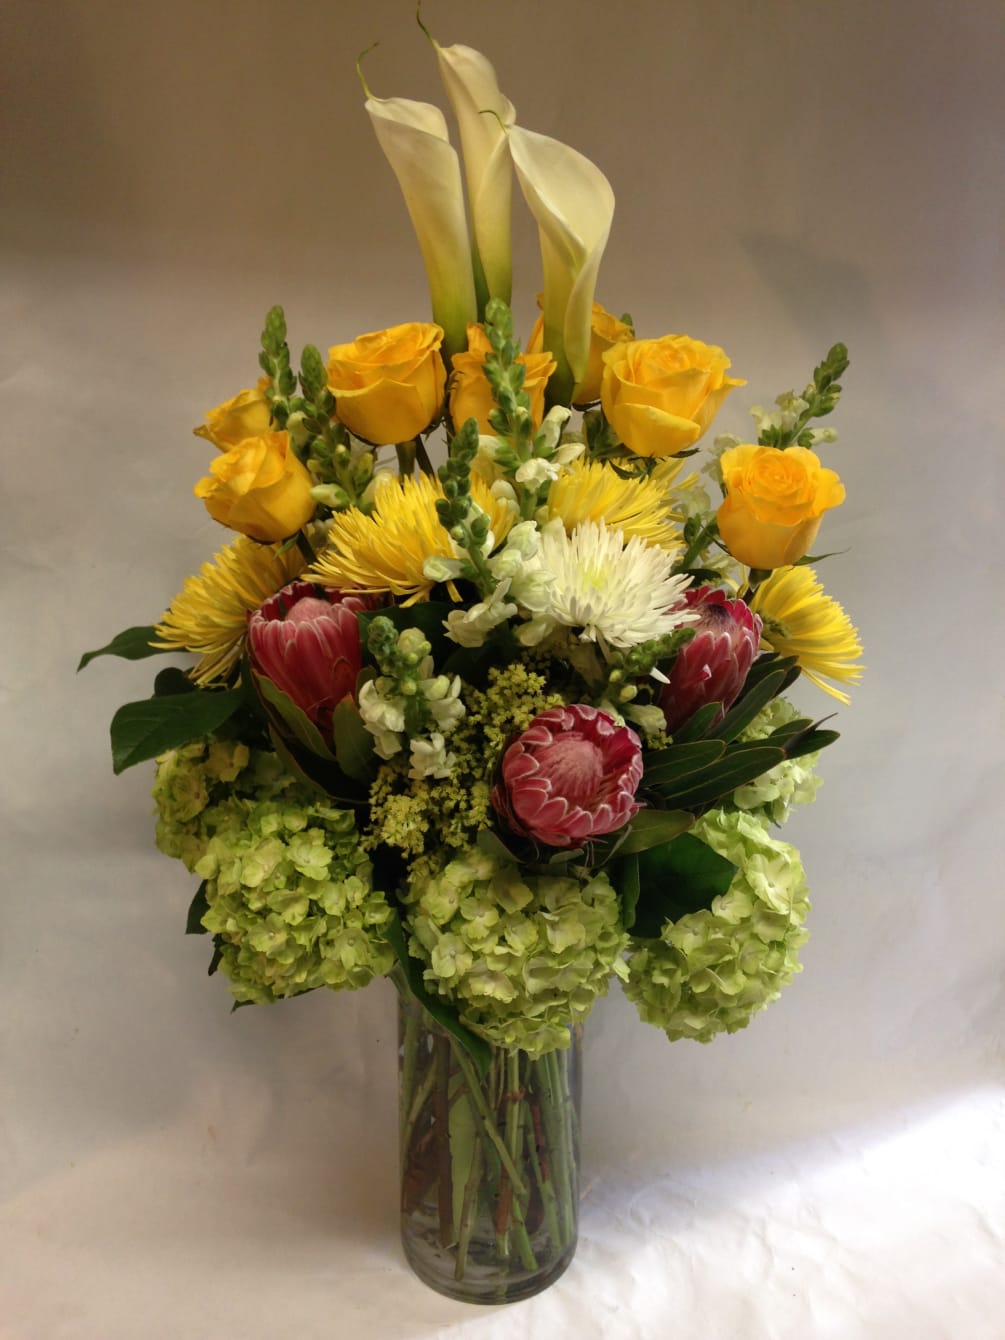 This tall arrangement comes complete with yellow roses, white &amp; yellow spider